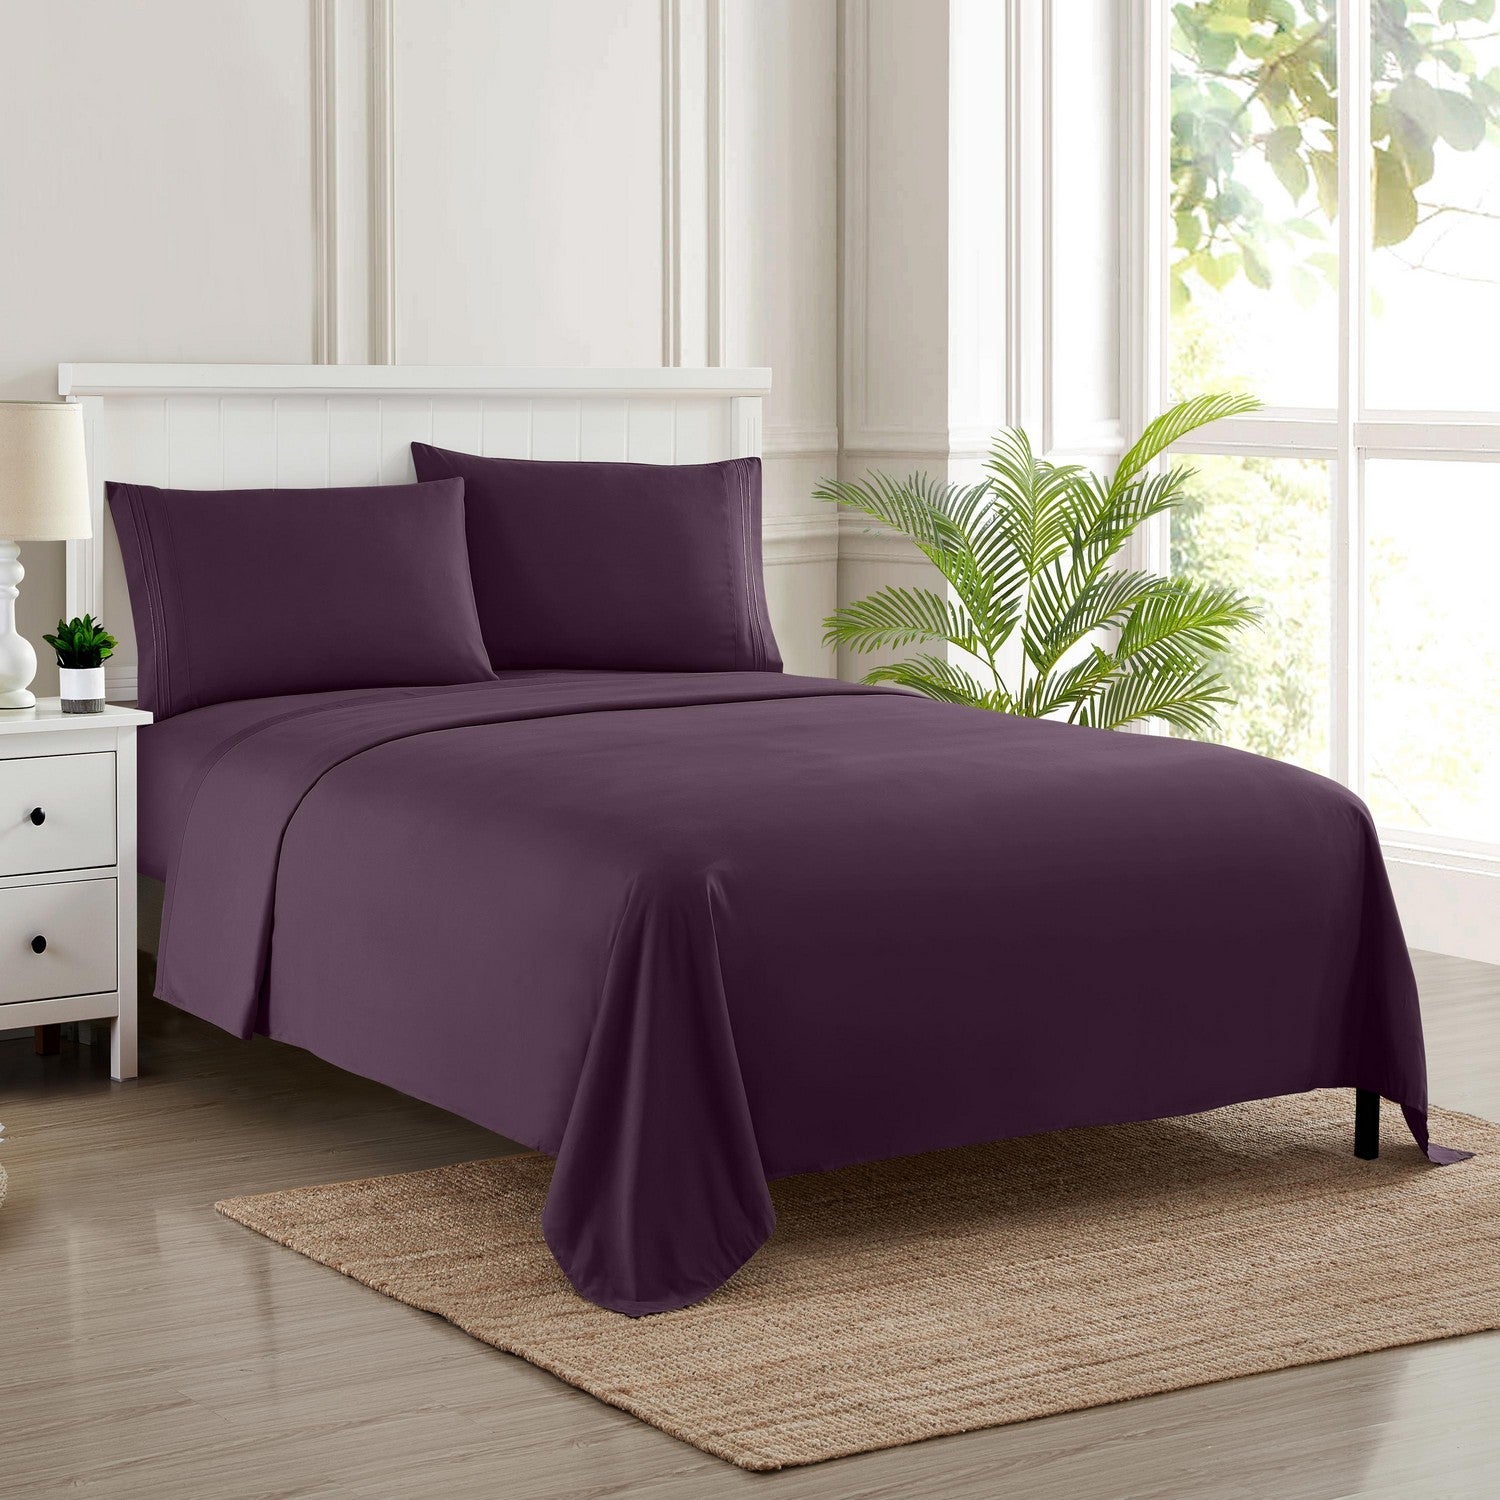 Classic 4-Piece Bed Sheet Set (Eggplant) - Bed